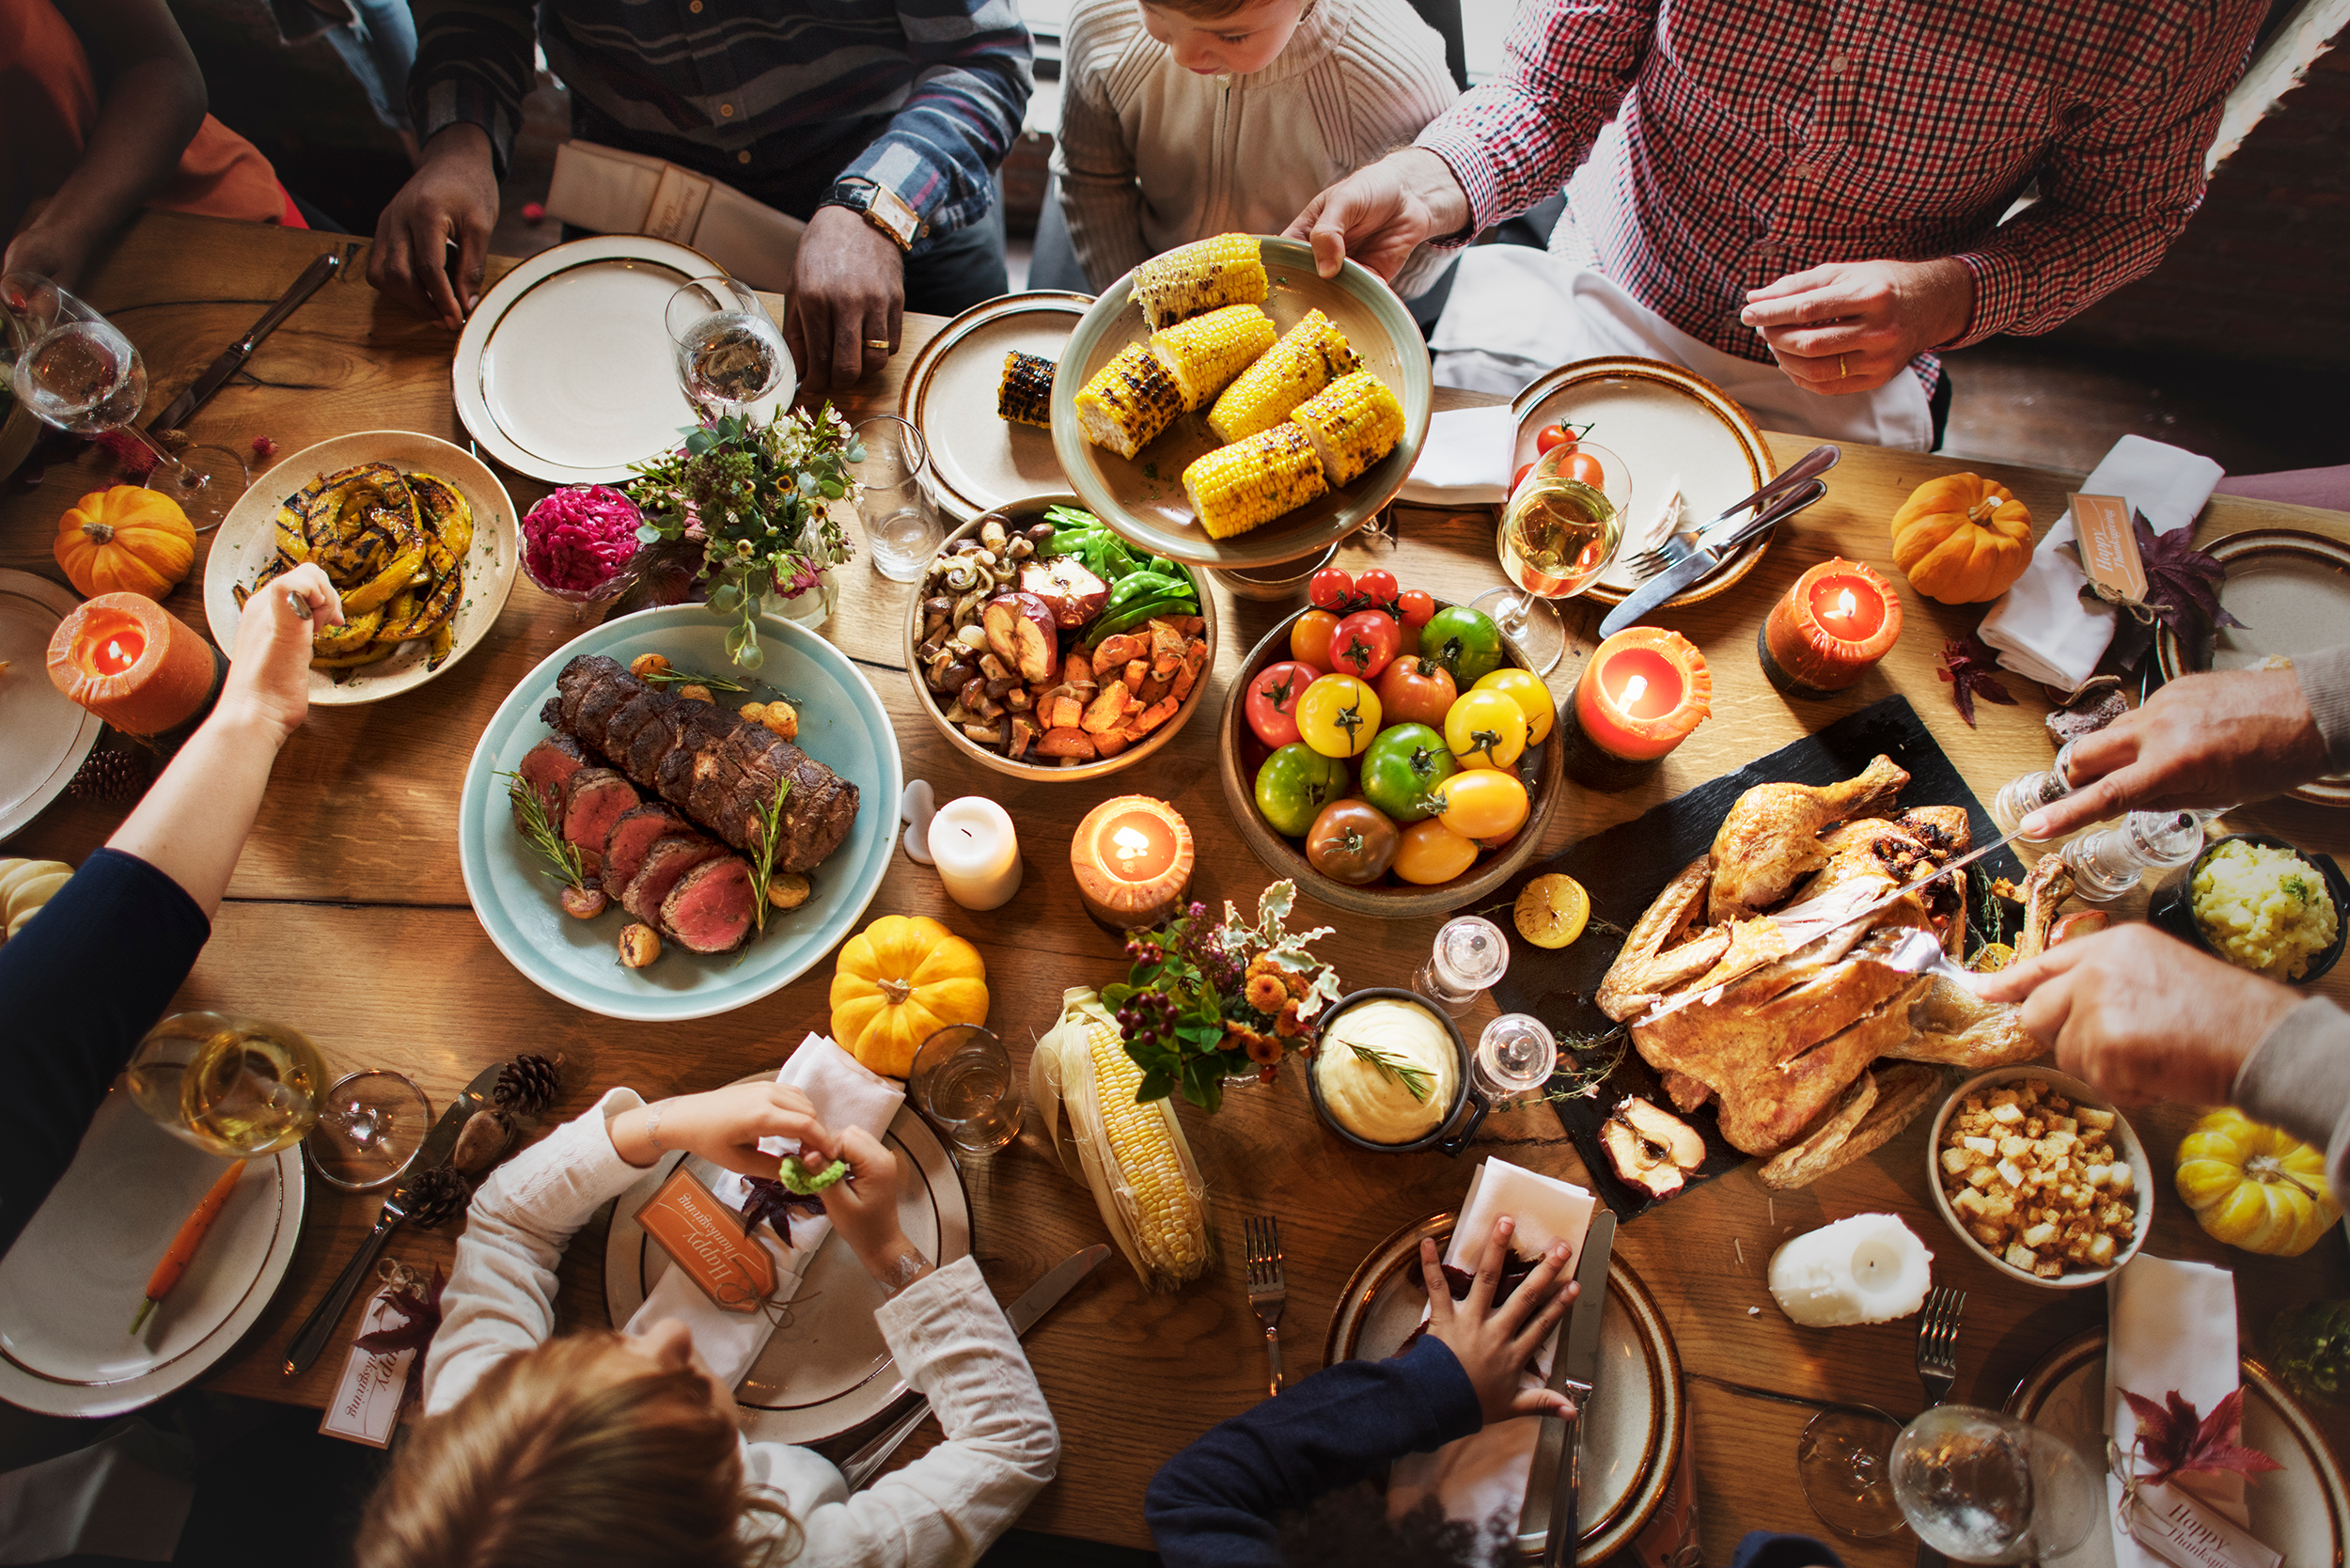 Thanksgiving rituals of connection